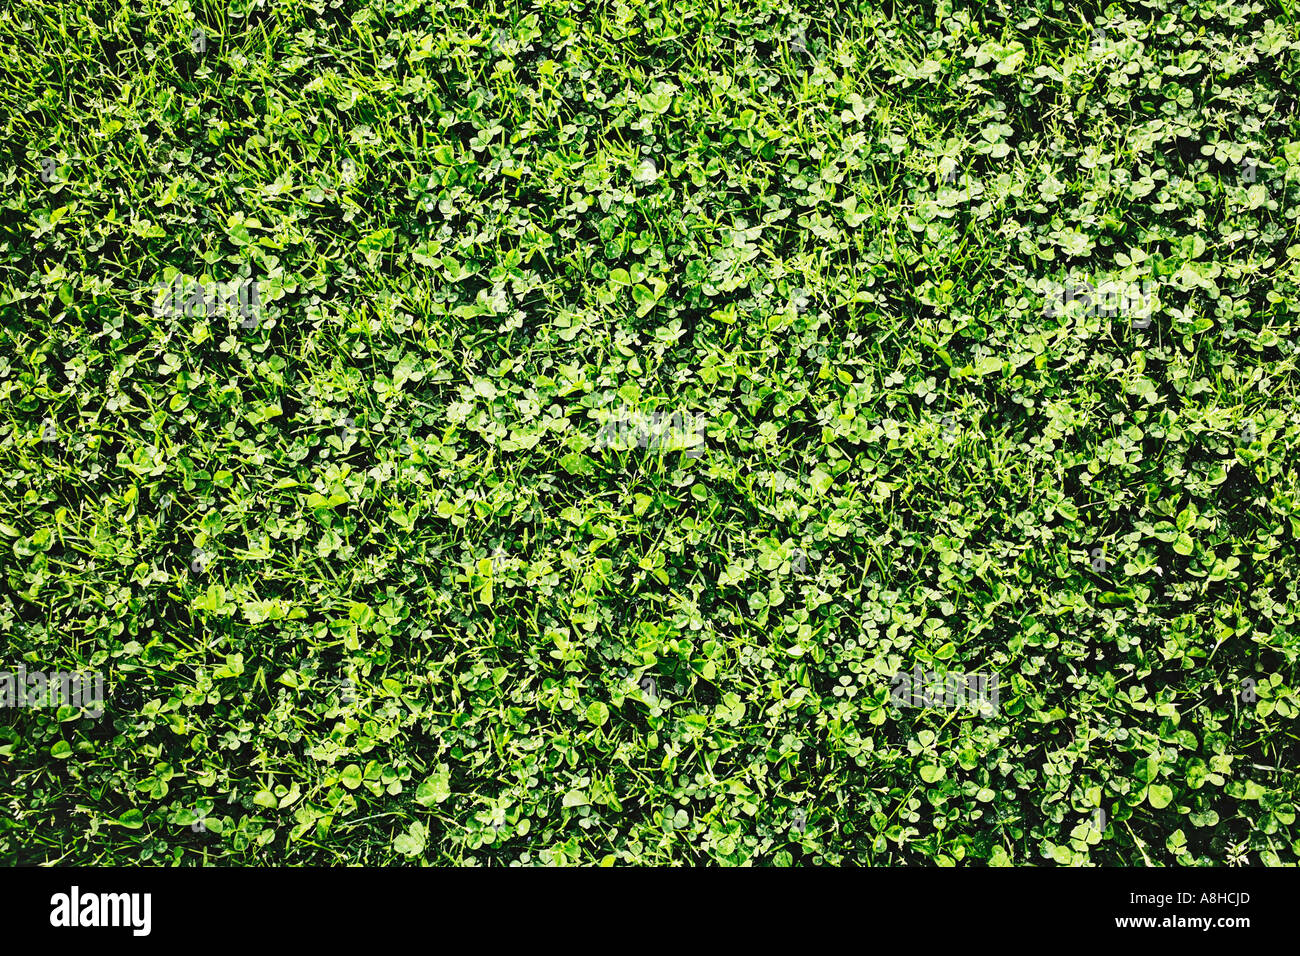 Green Grass And Clover Stock Photo